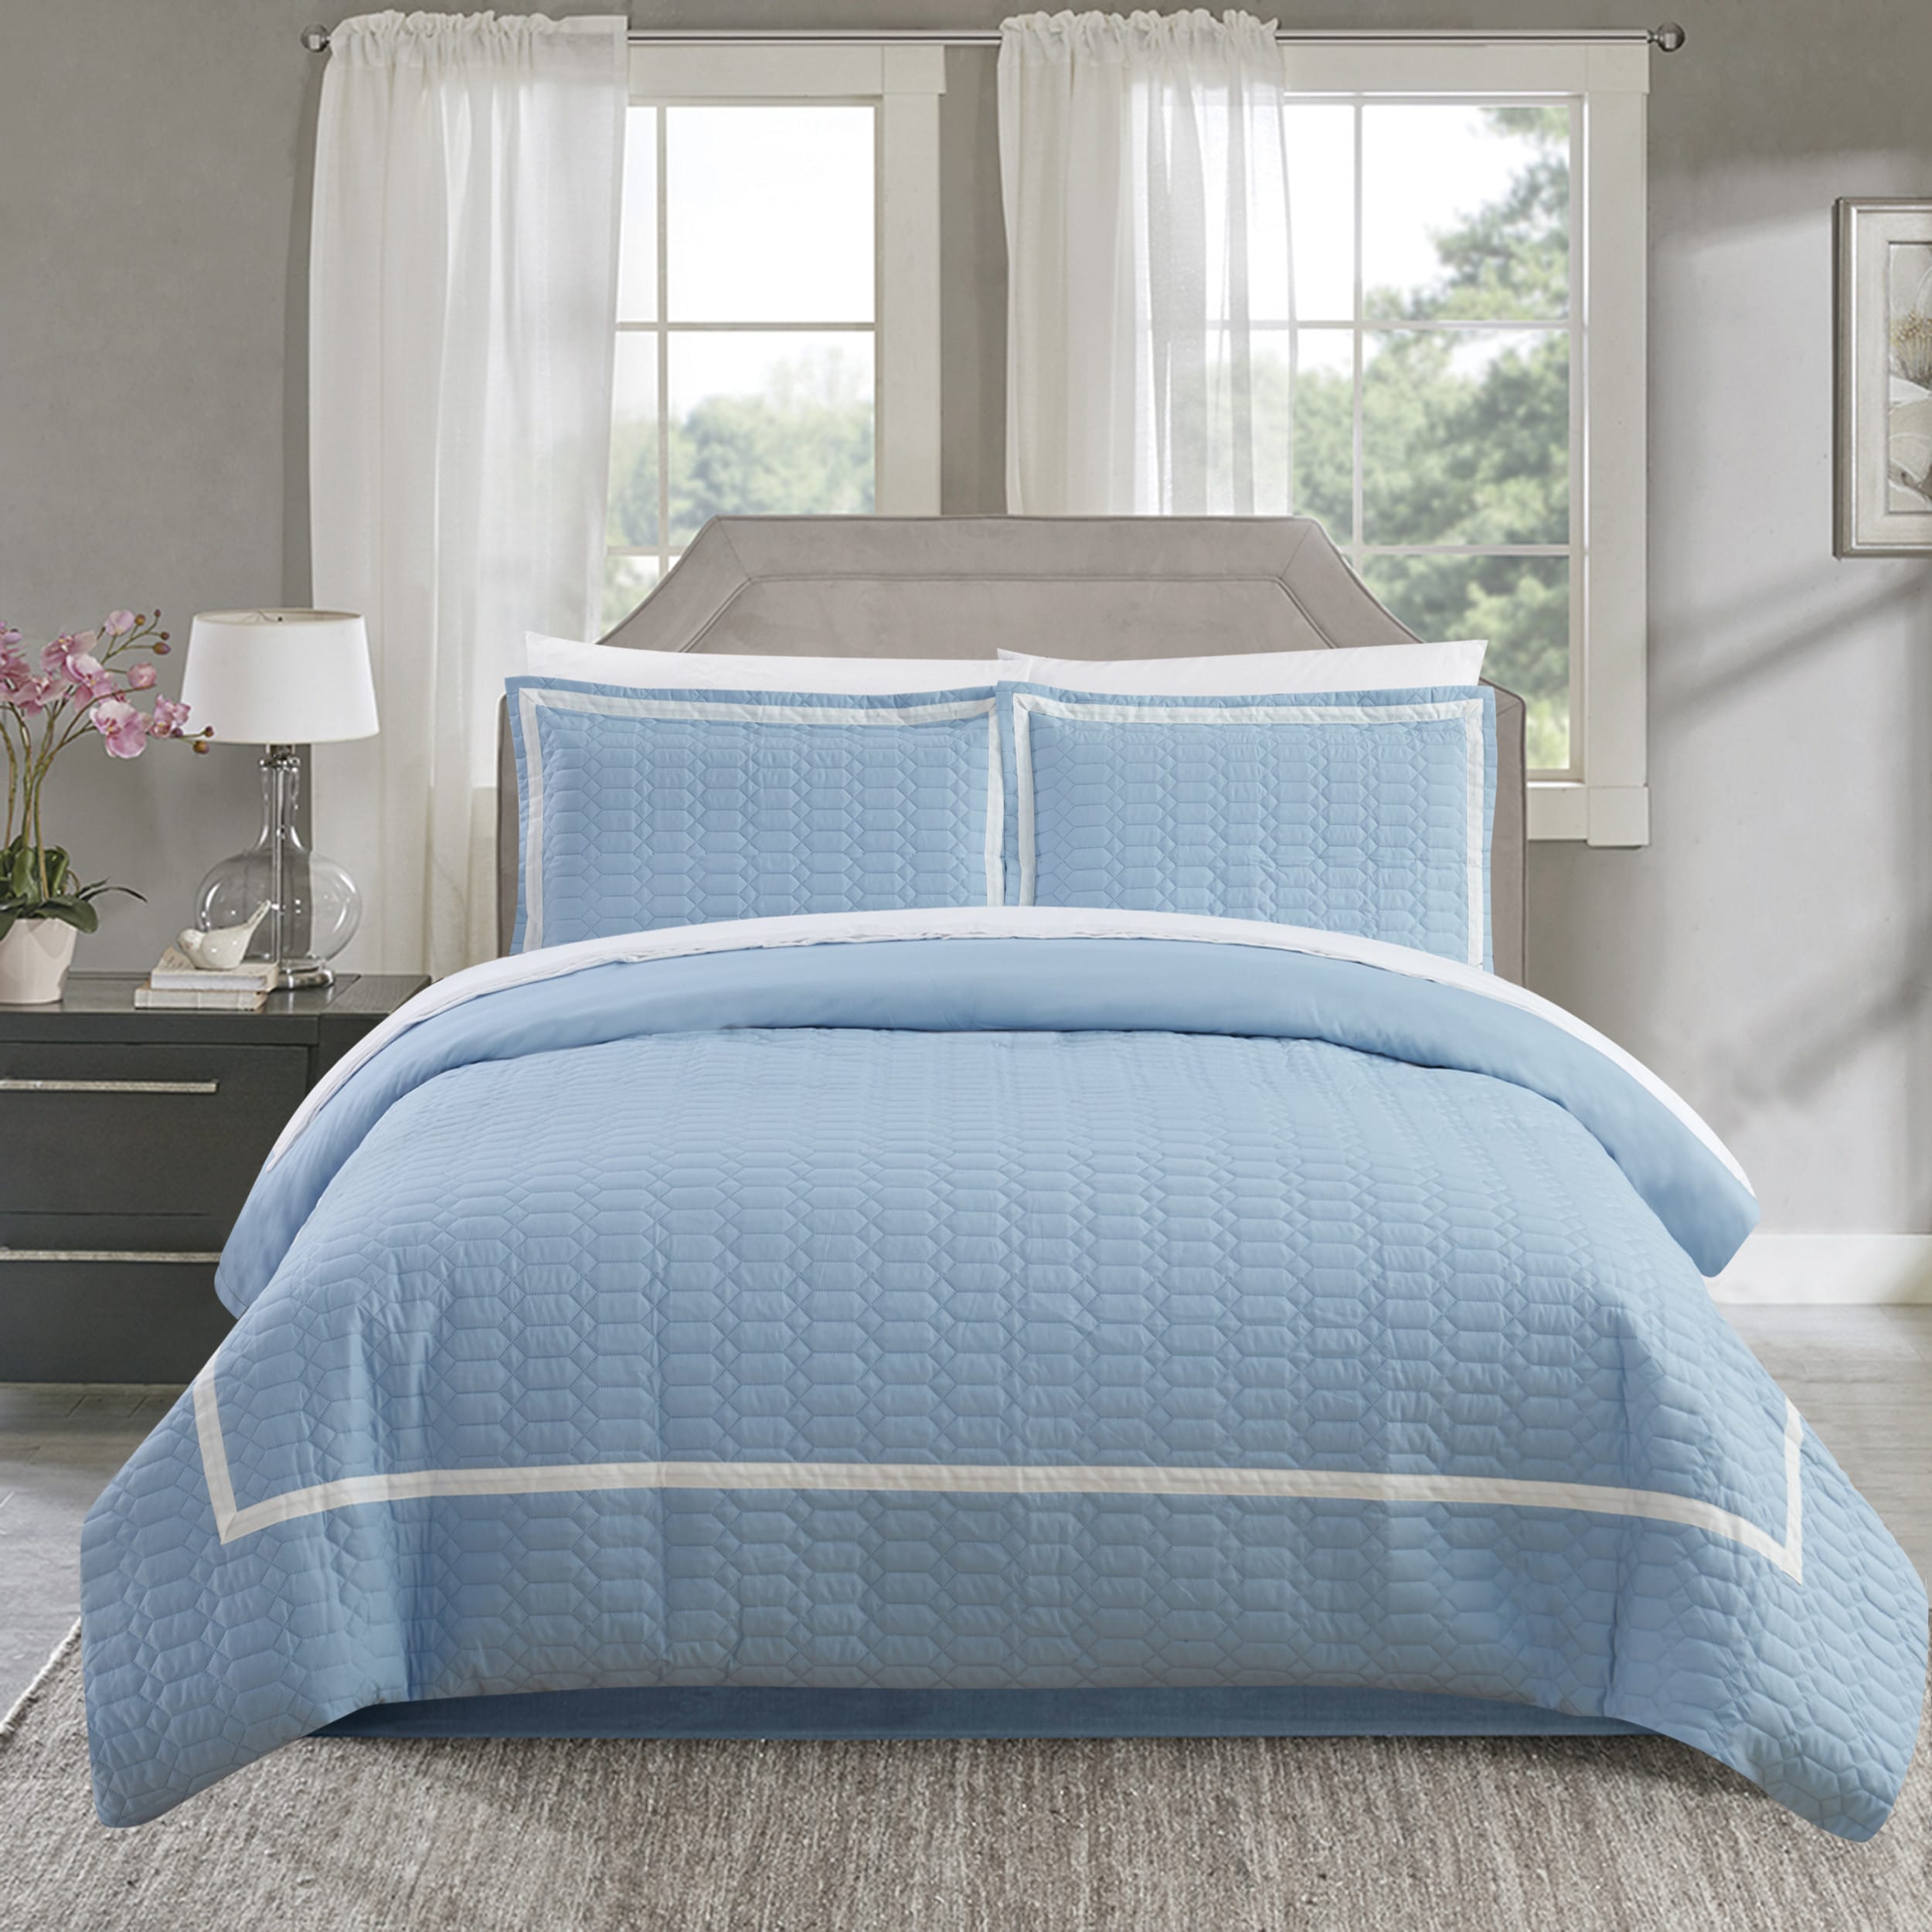 Shop Chic Home Krystel Hotel Collection Blue Banded 3 Piece Duvet